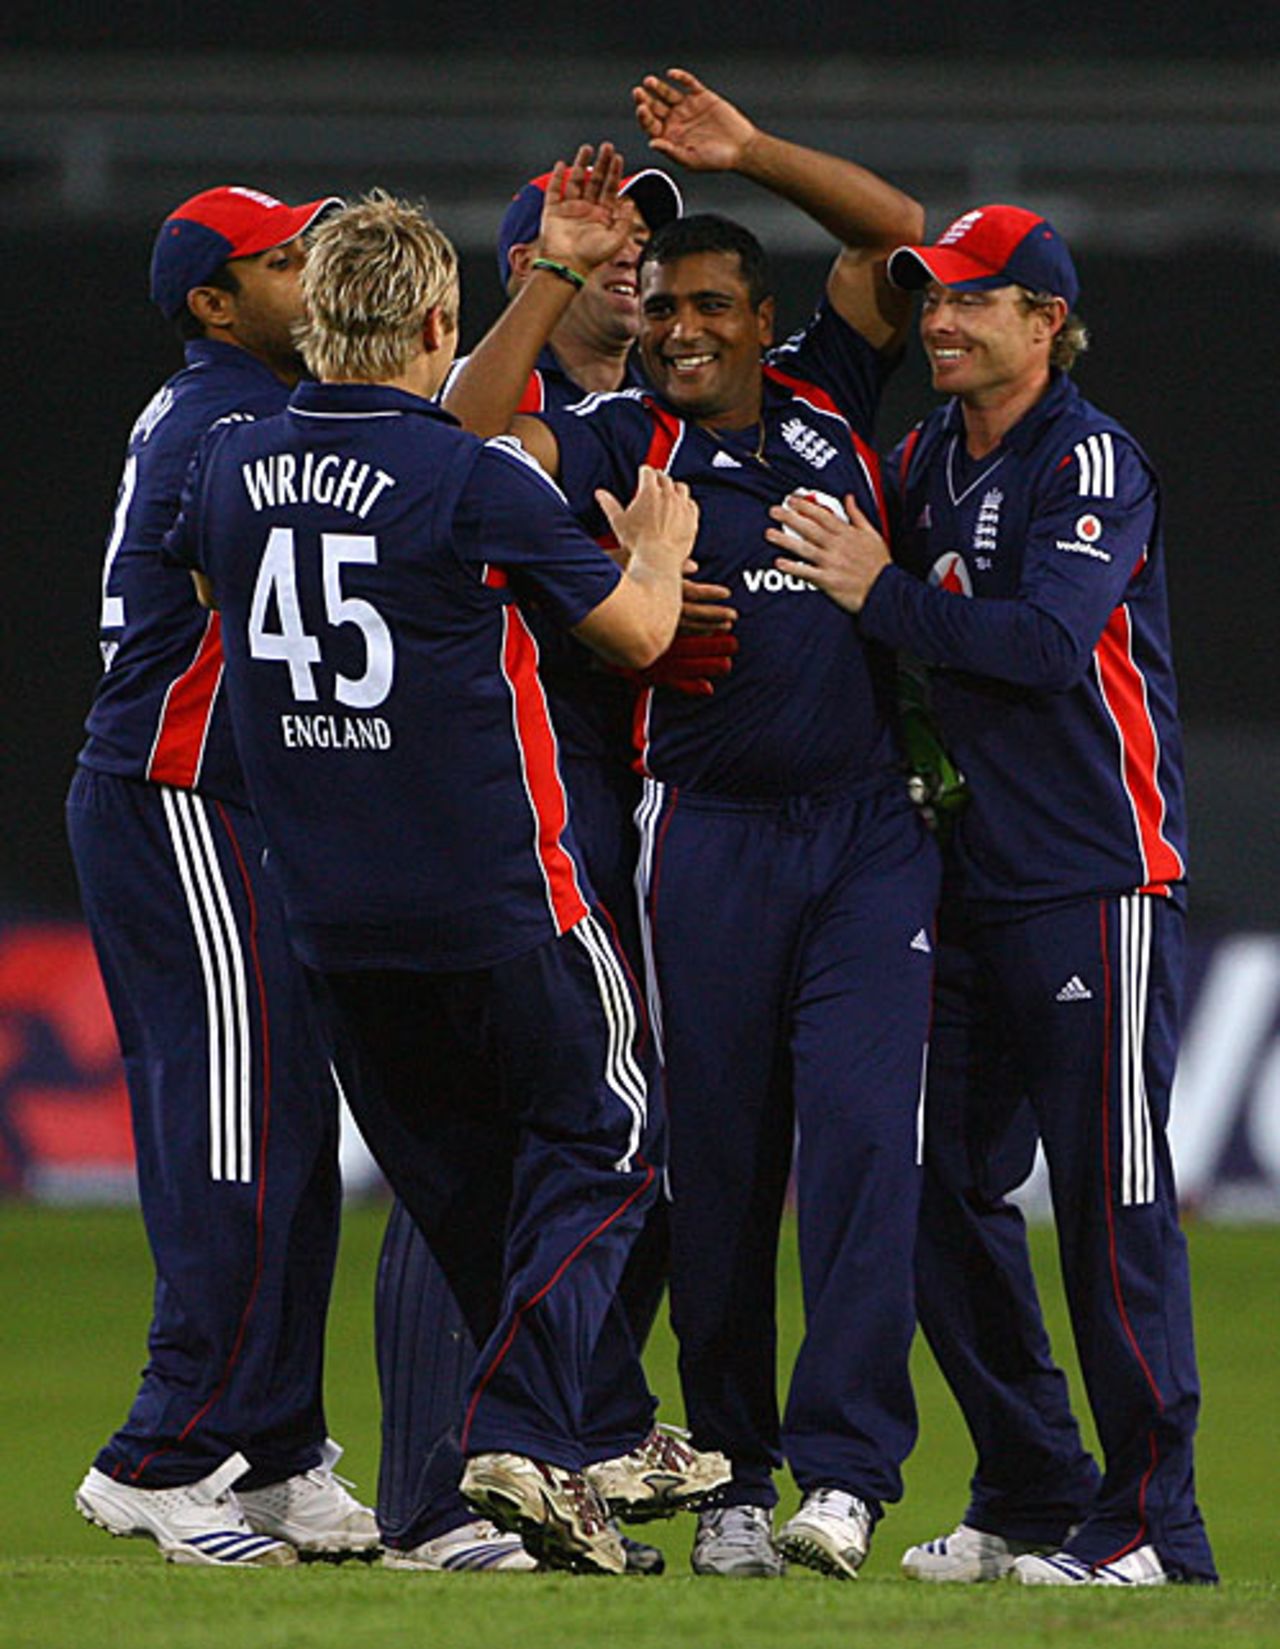 Samit Patel is congratulated on the wicket of Herschelle Gibbs, England v South Africa, 1st ODI, Headingley, August 22, 2008